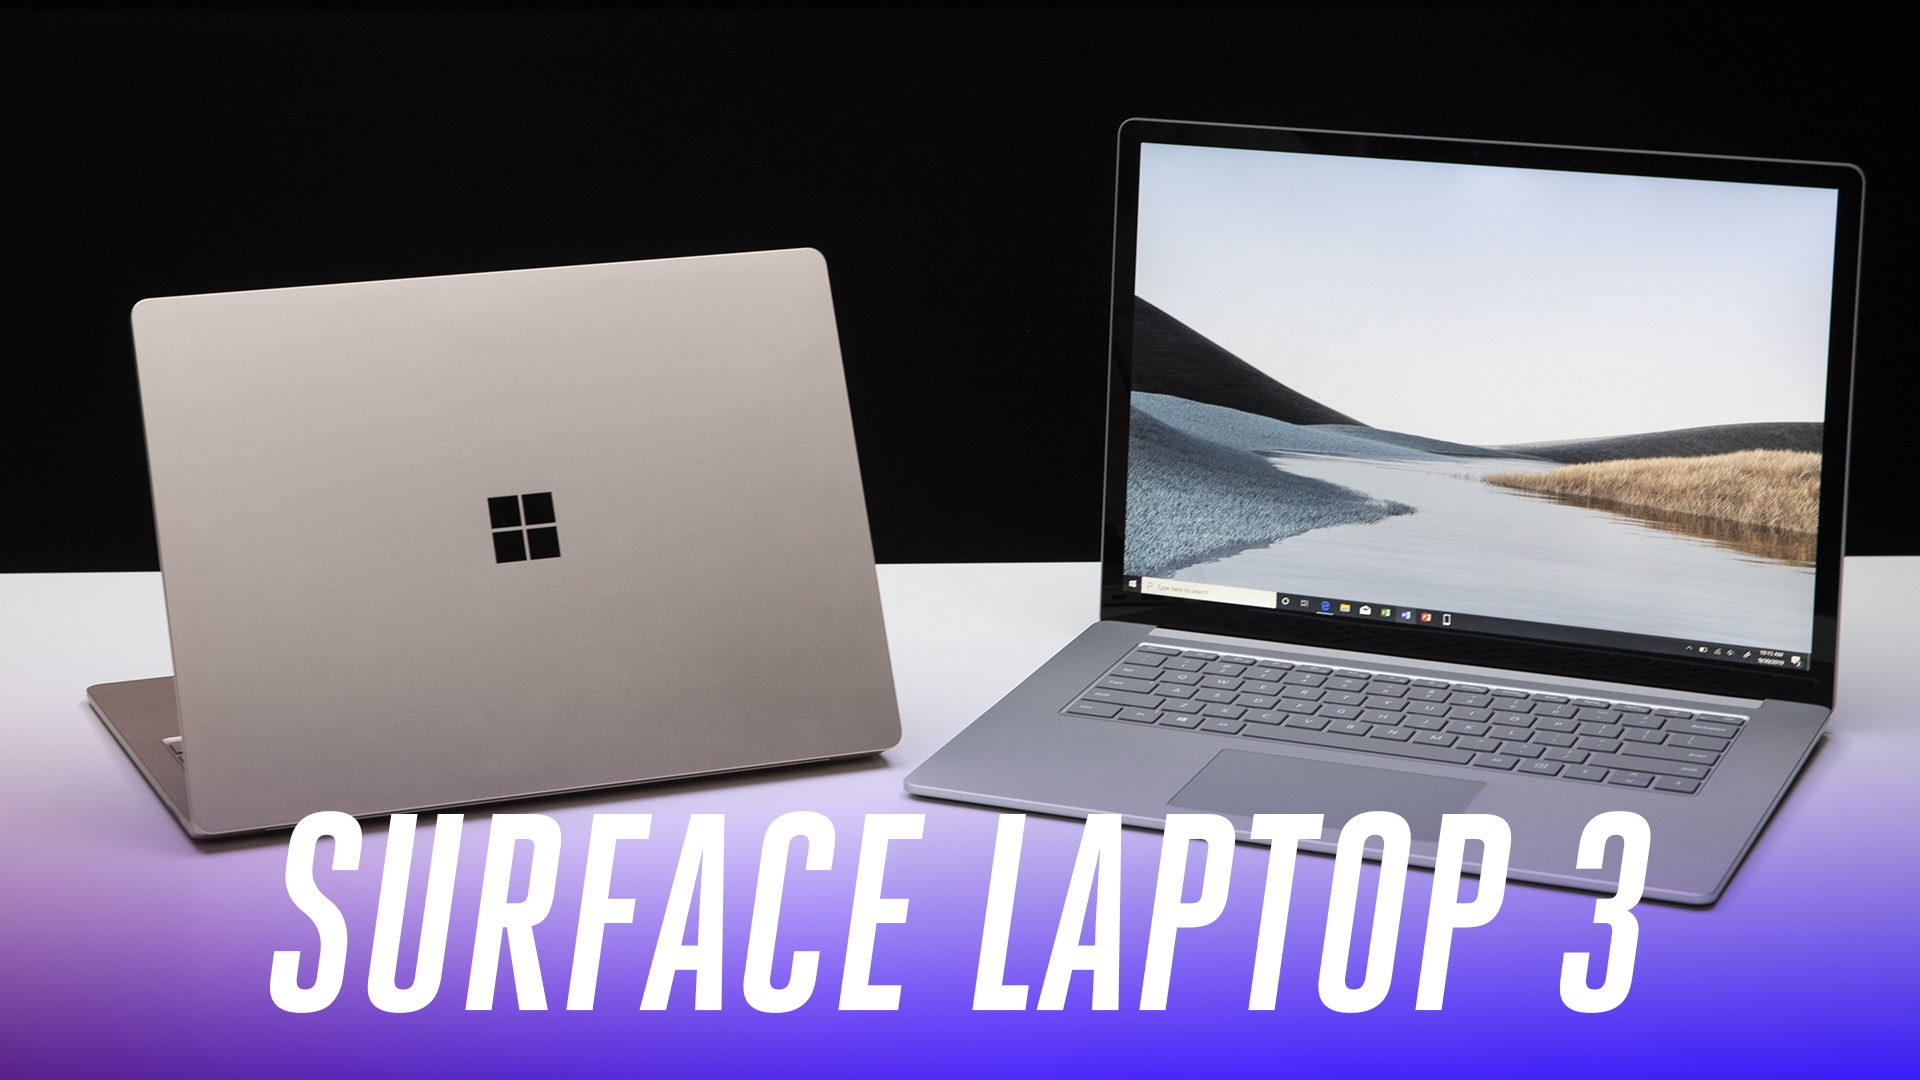 Microsoft Surface Laptop 3 (13-inch, 2019) review: Third time